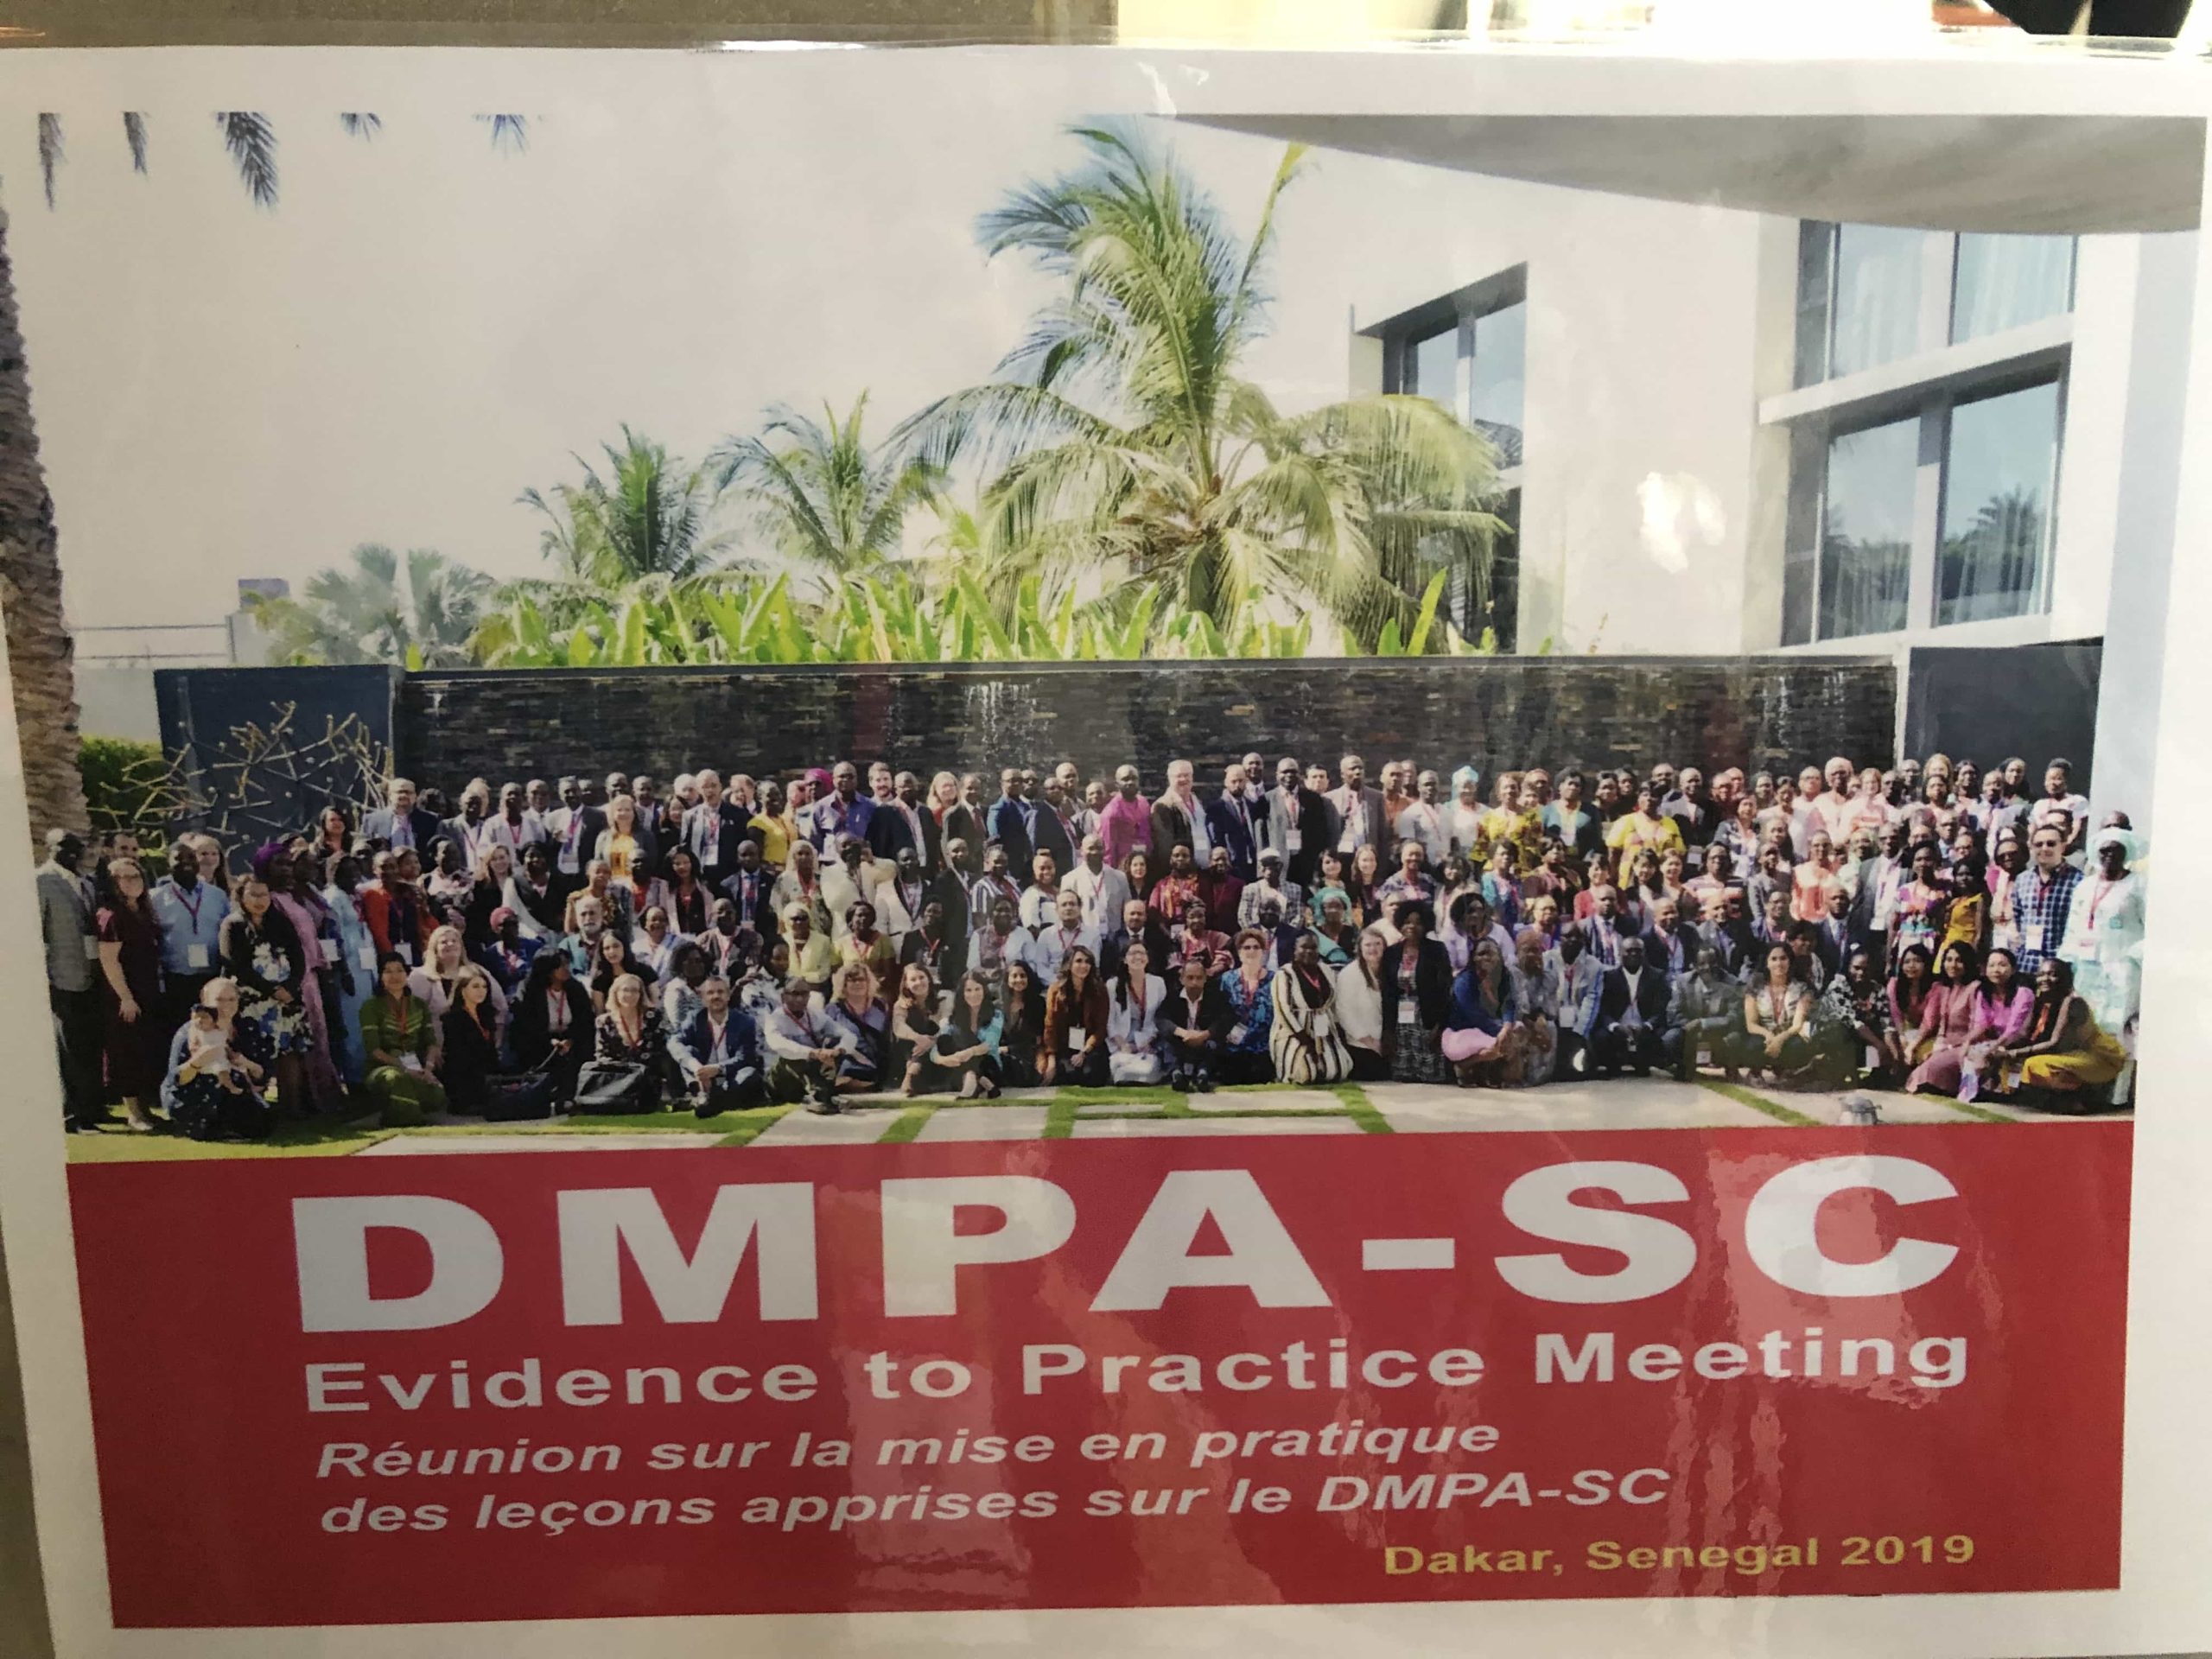 Participants gather for the DMPA-SC Evidence to Practice meeting in Dakar, Senegal in 2019. Image credit: Catherine Packer